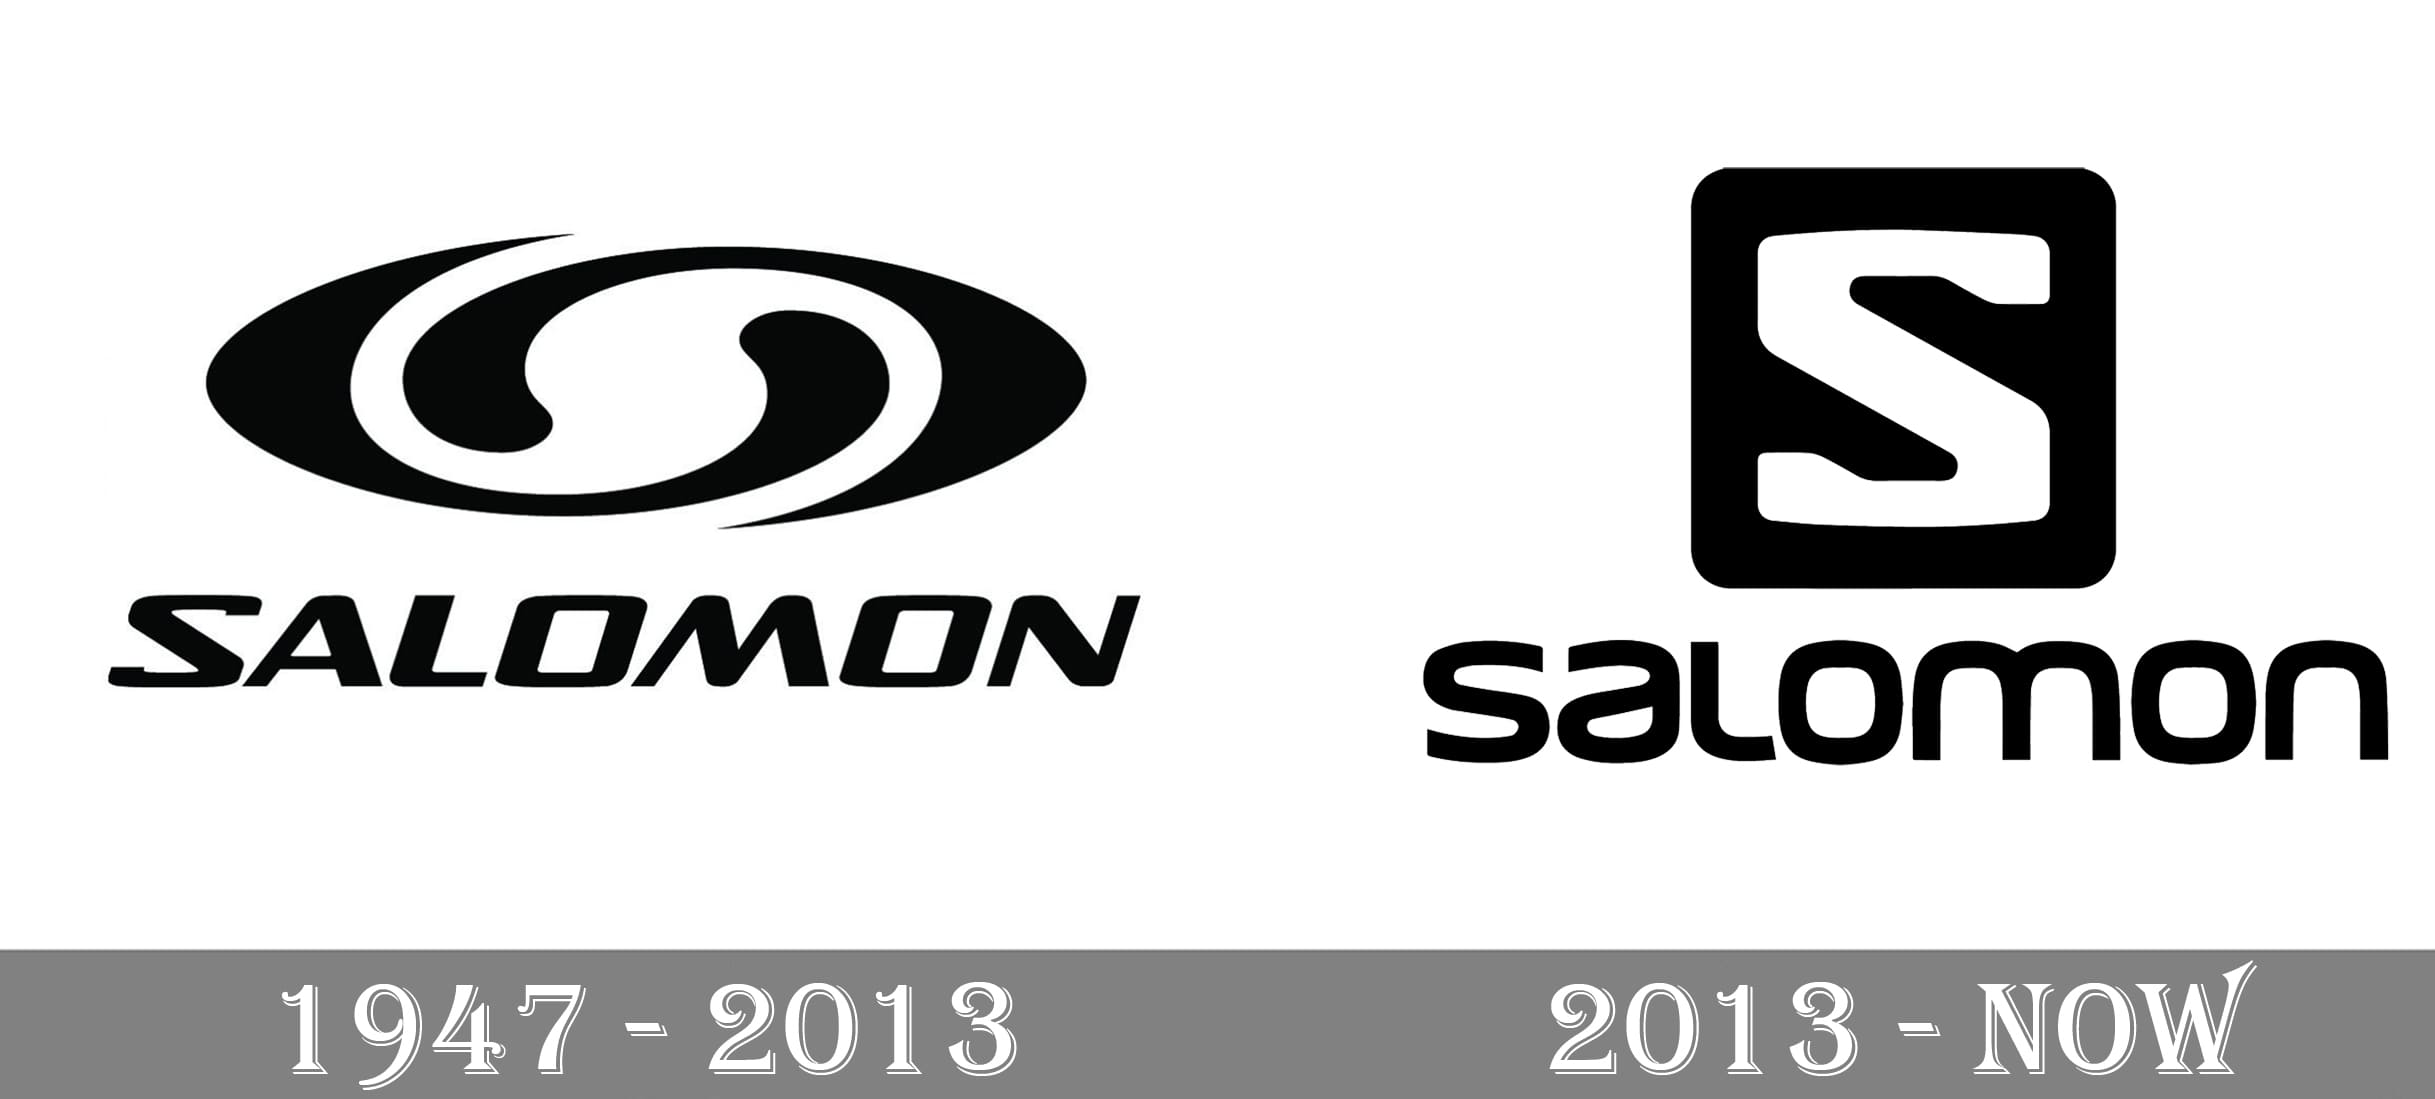 Salomon Launches A Promotion Campaign With A Refreshed Logo | vlr.eng.br